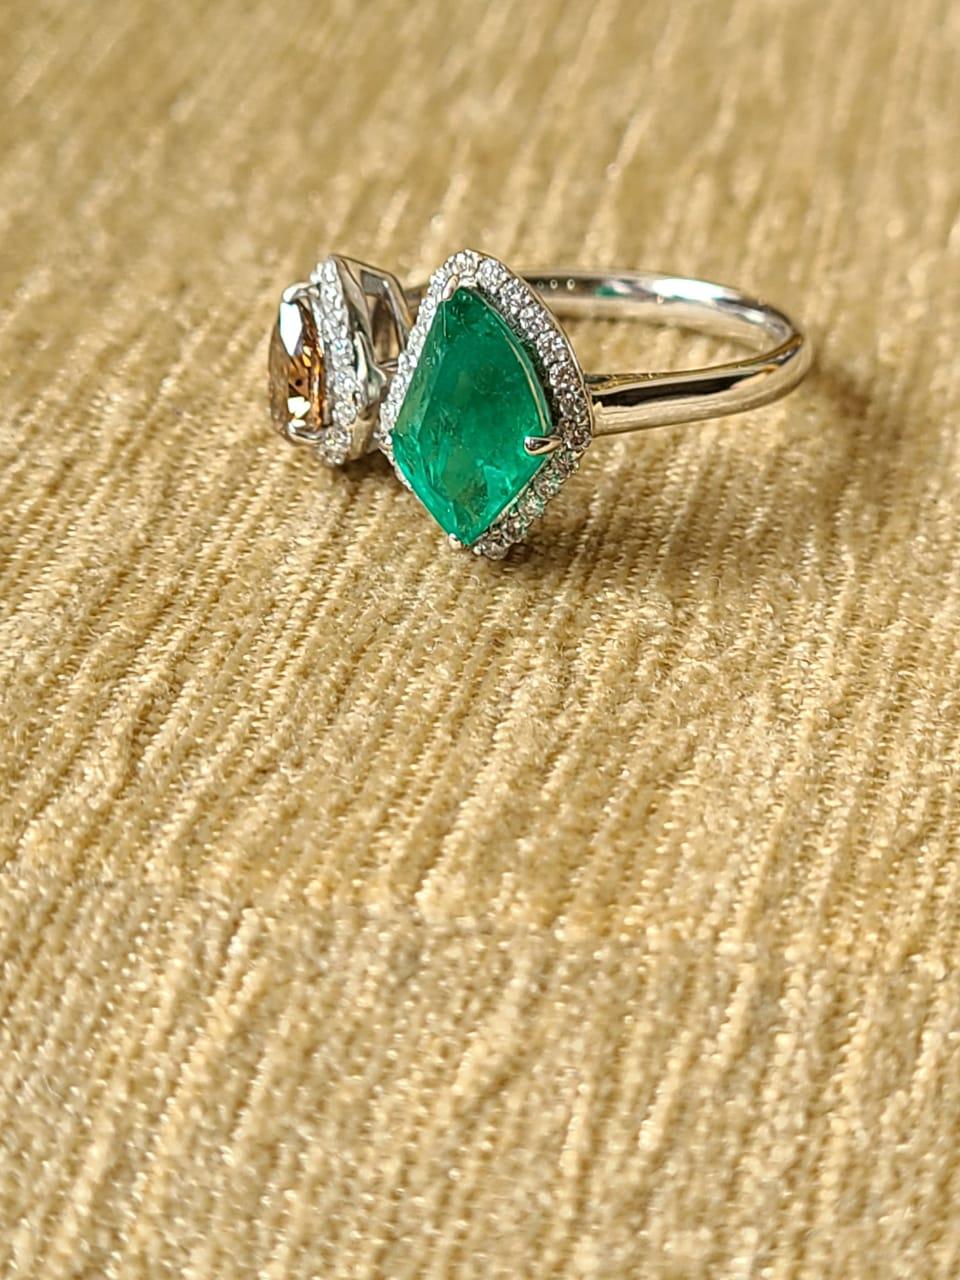 A very beautiful fancy shaped Emerald & Brown Diamond Cocktail Ring set in 18K White Gold. The Emerald weighs 1.17 carats and is of Zambian origin. The Emerald is completely natural, without any treatment. The weight of the Diamonds is 0.87 carats.